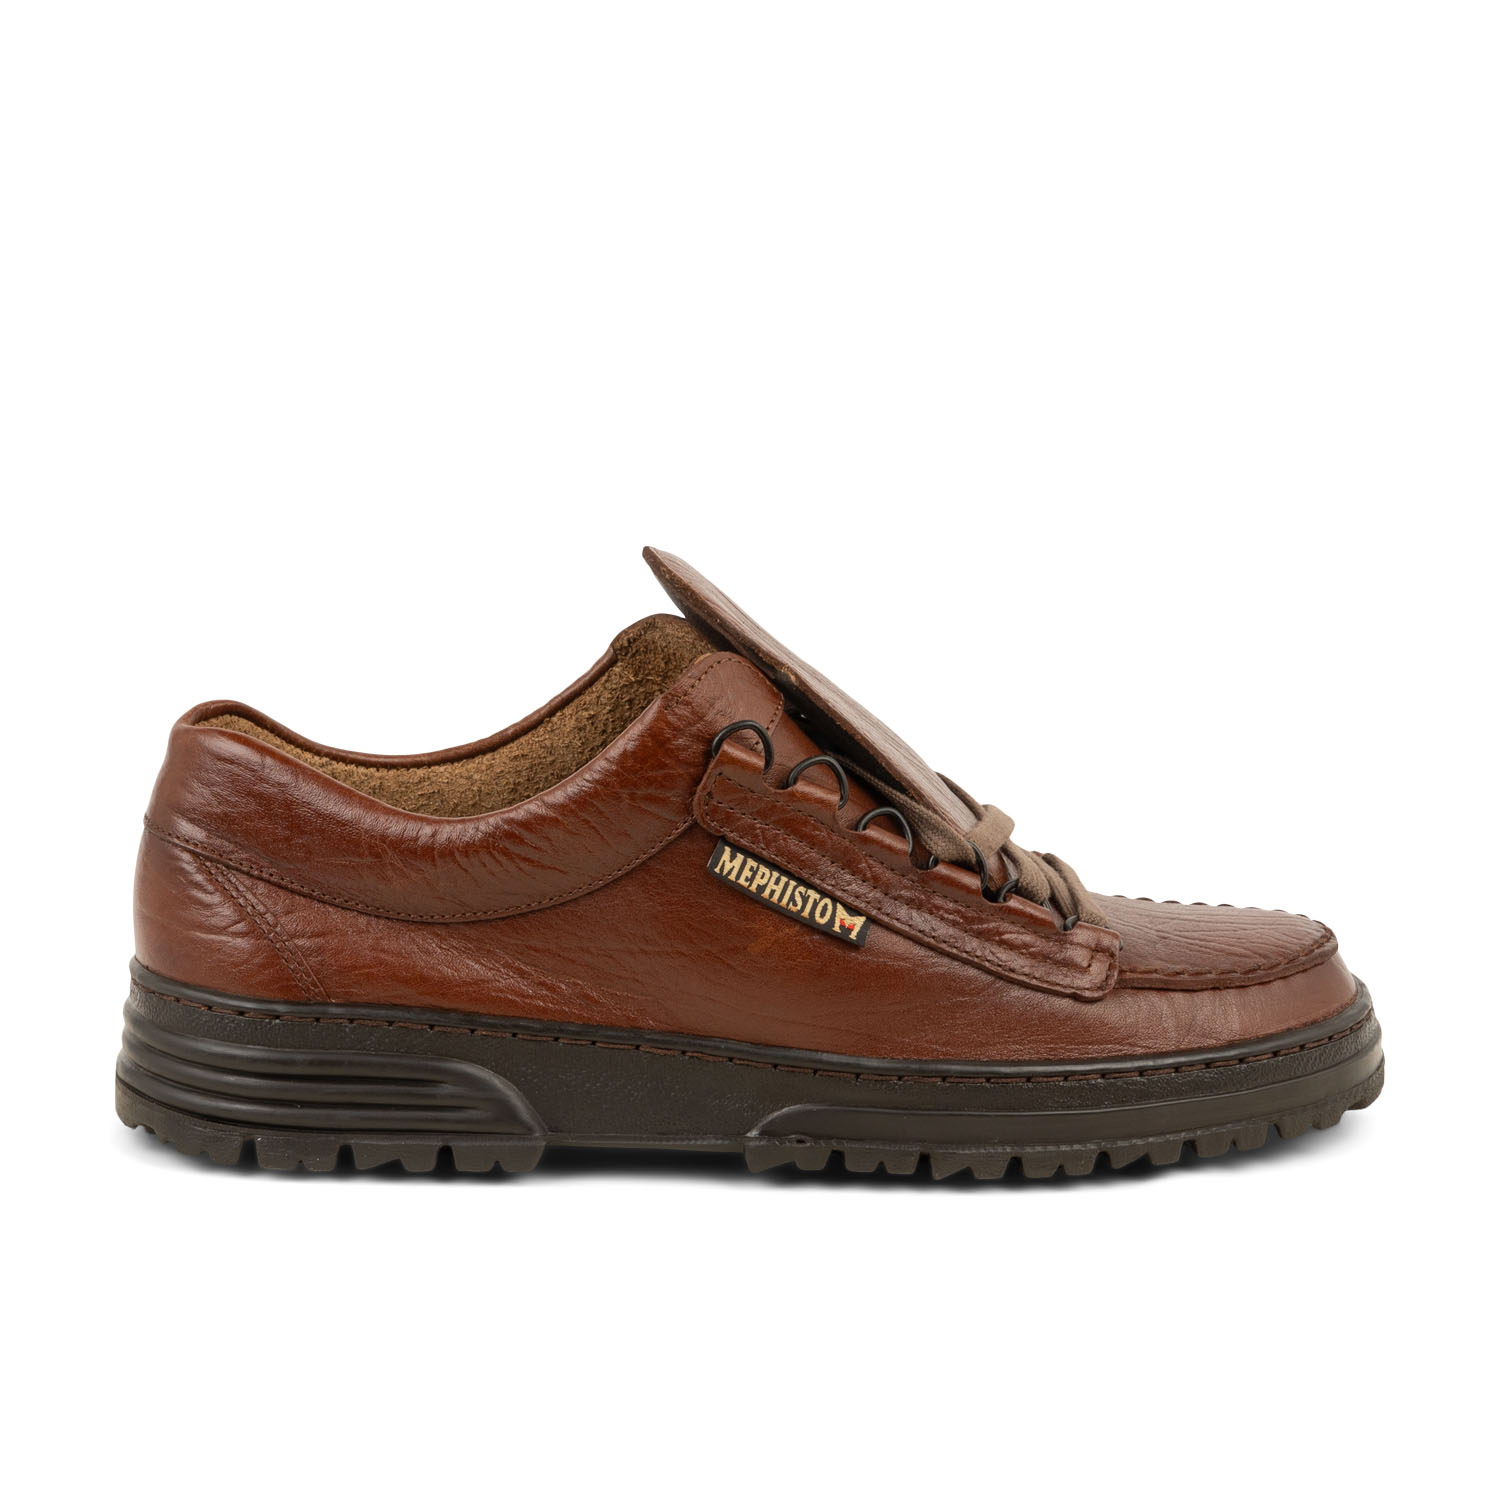 01 - CRUISER - MEPHISTO - Chaussures à lacets - Cuir